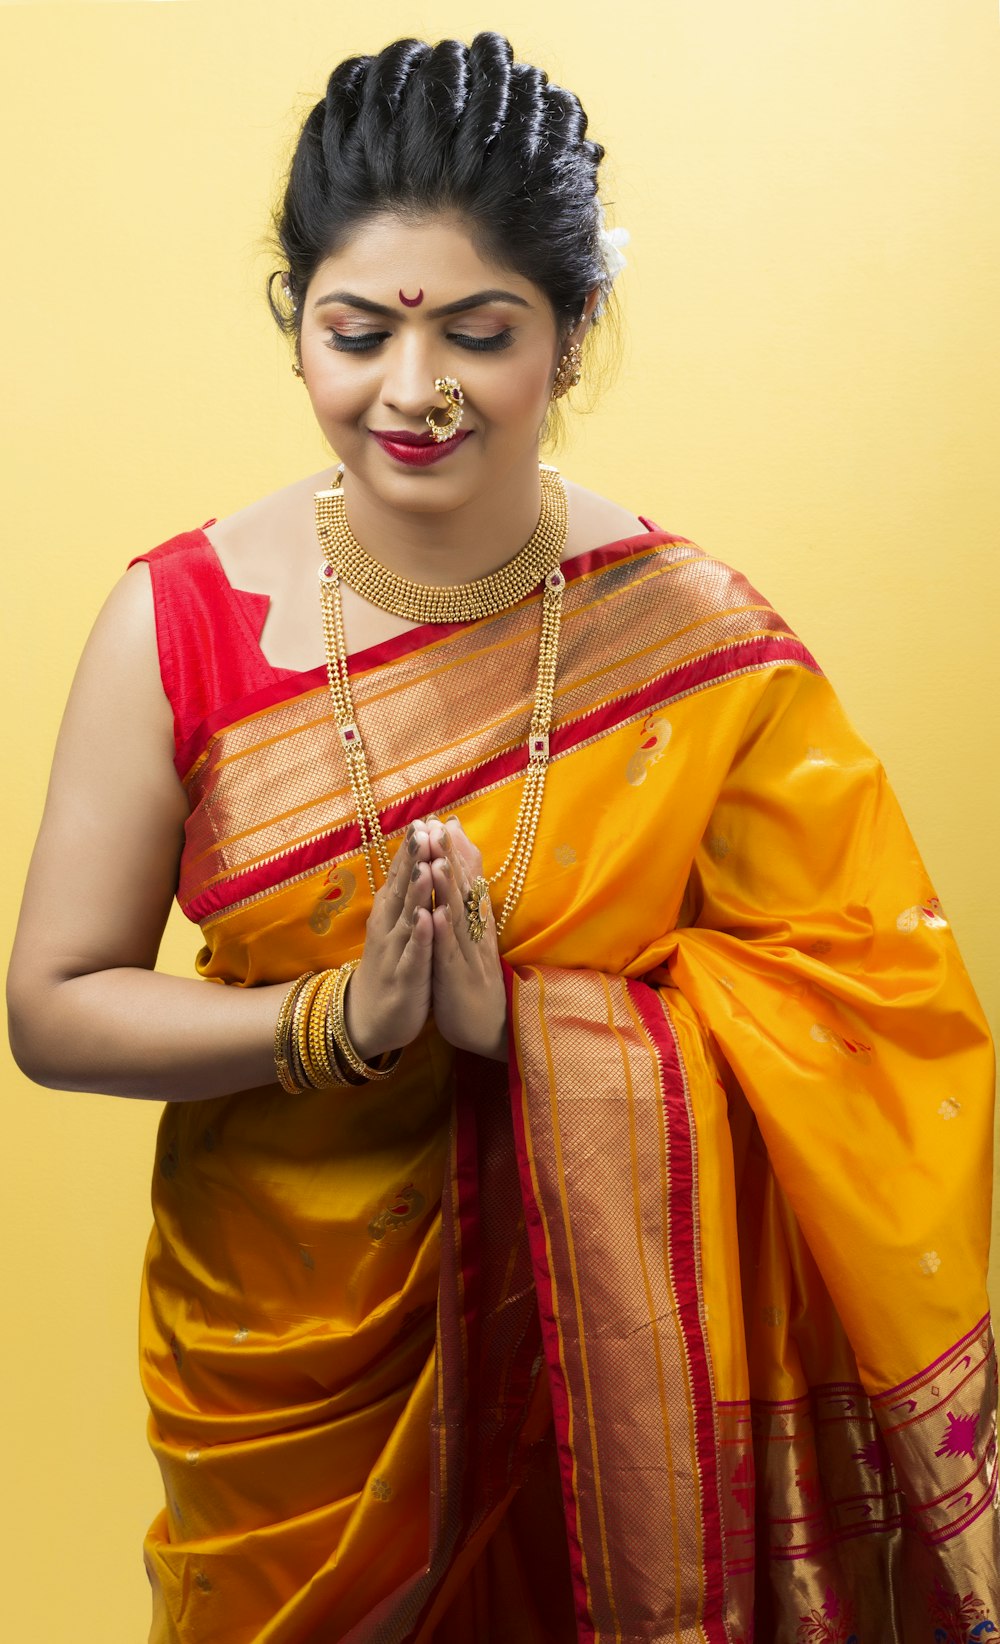 woman in yellow and red sari